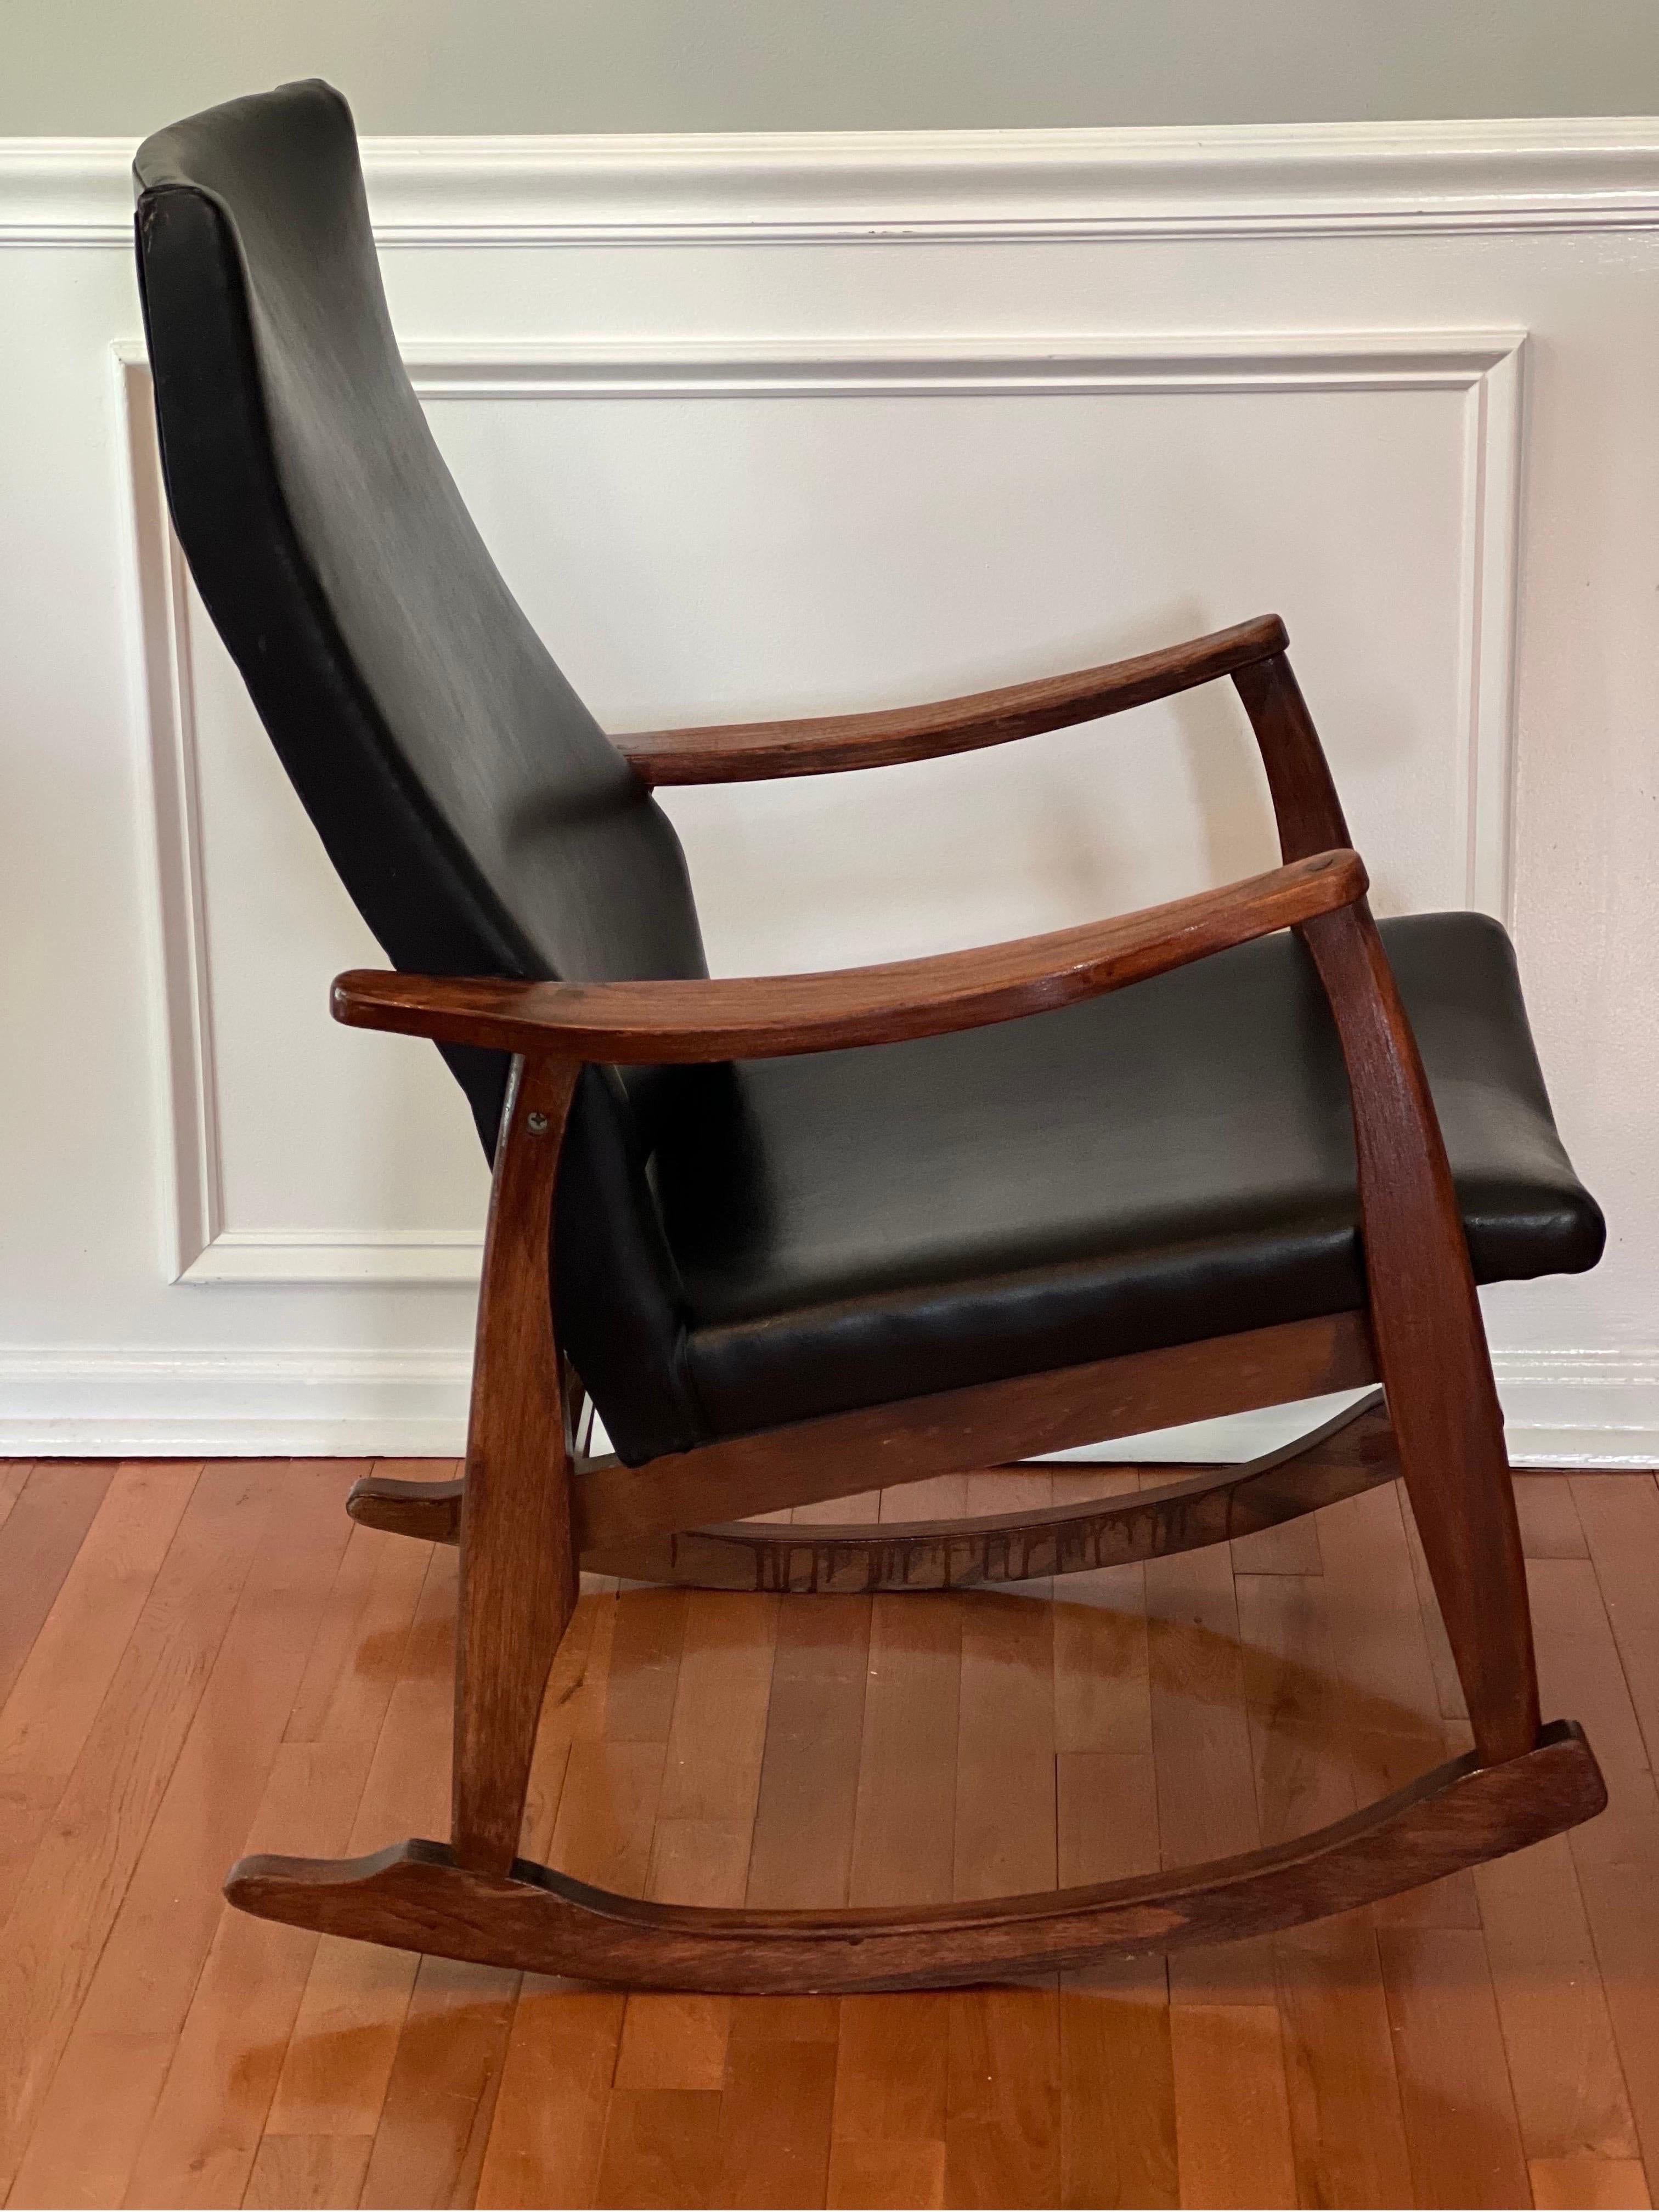 Elegant vintage midcentury rocking chair in the style of Milo Baughman. This comfortable rocker features a sturdy, solid wood frame with cushioned black naugahyde in very good condition. A beautiful piece.